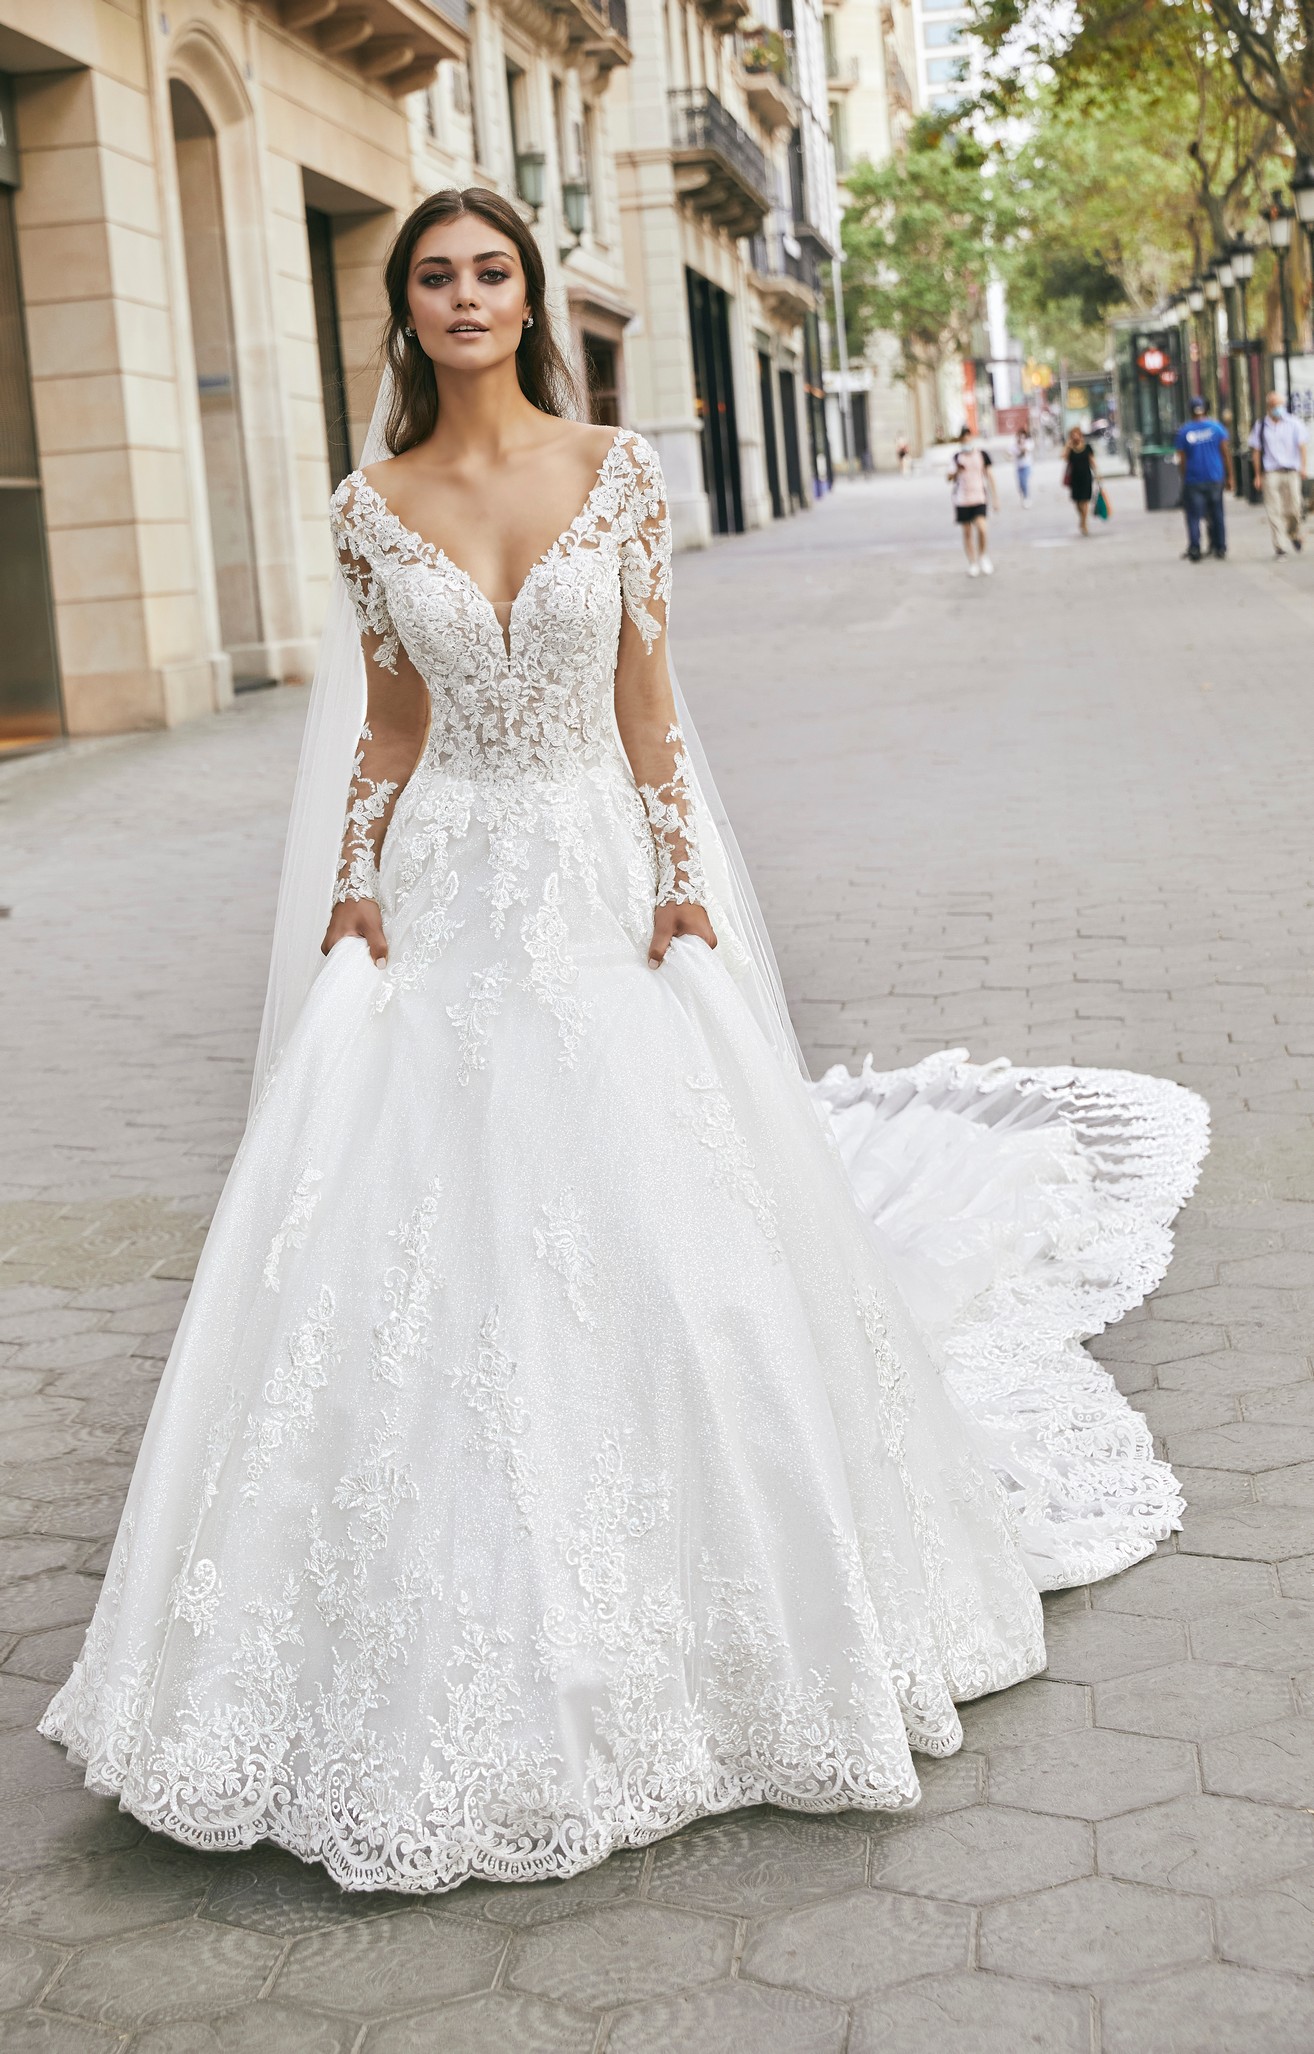 Brown haired lady standing on street in Barcelona wearing long lace sleeved ballgown wedding dress and veil